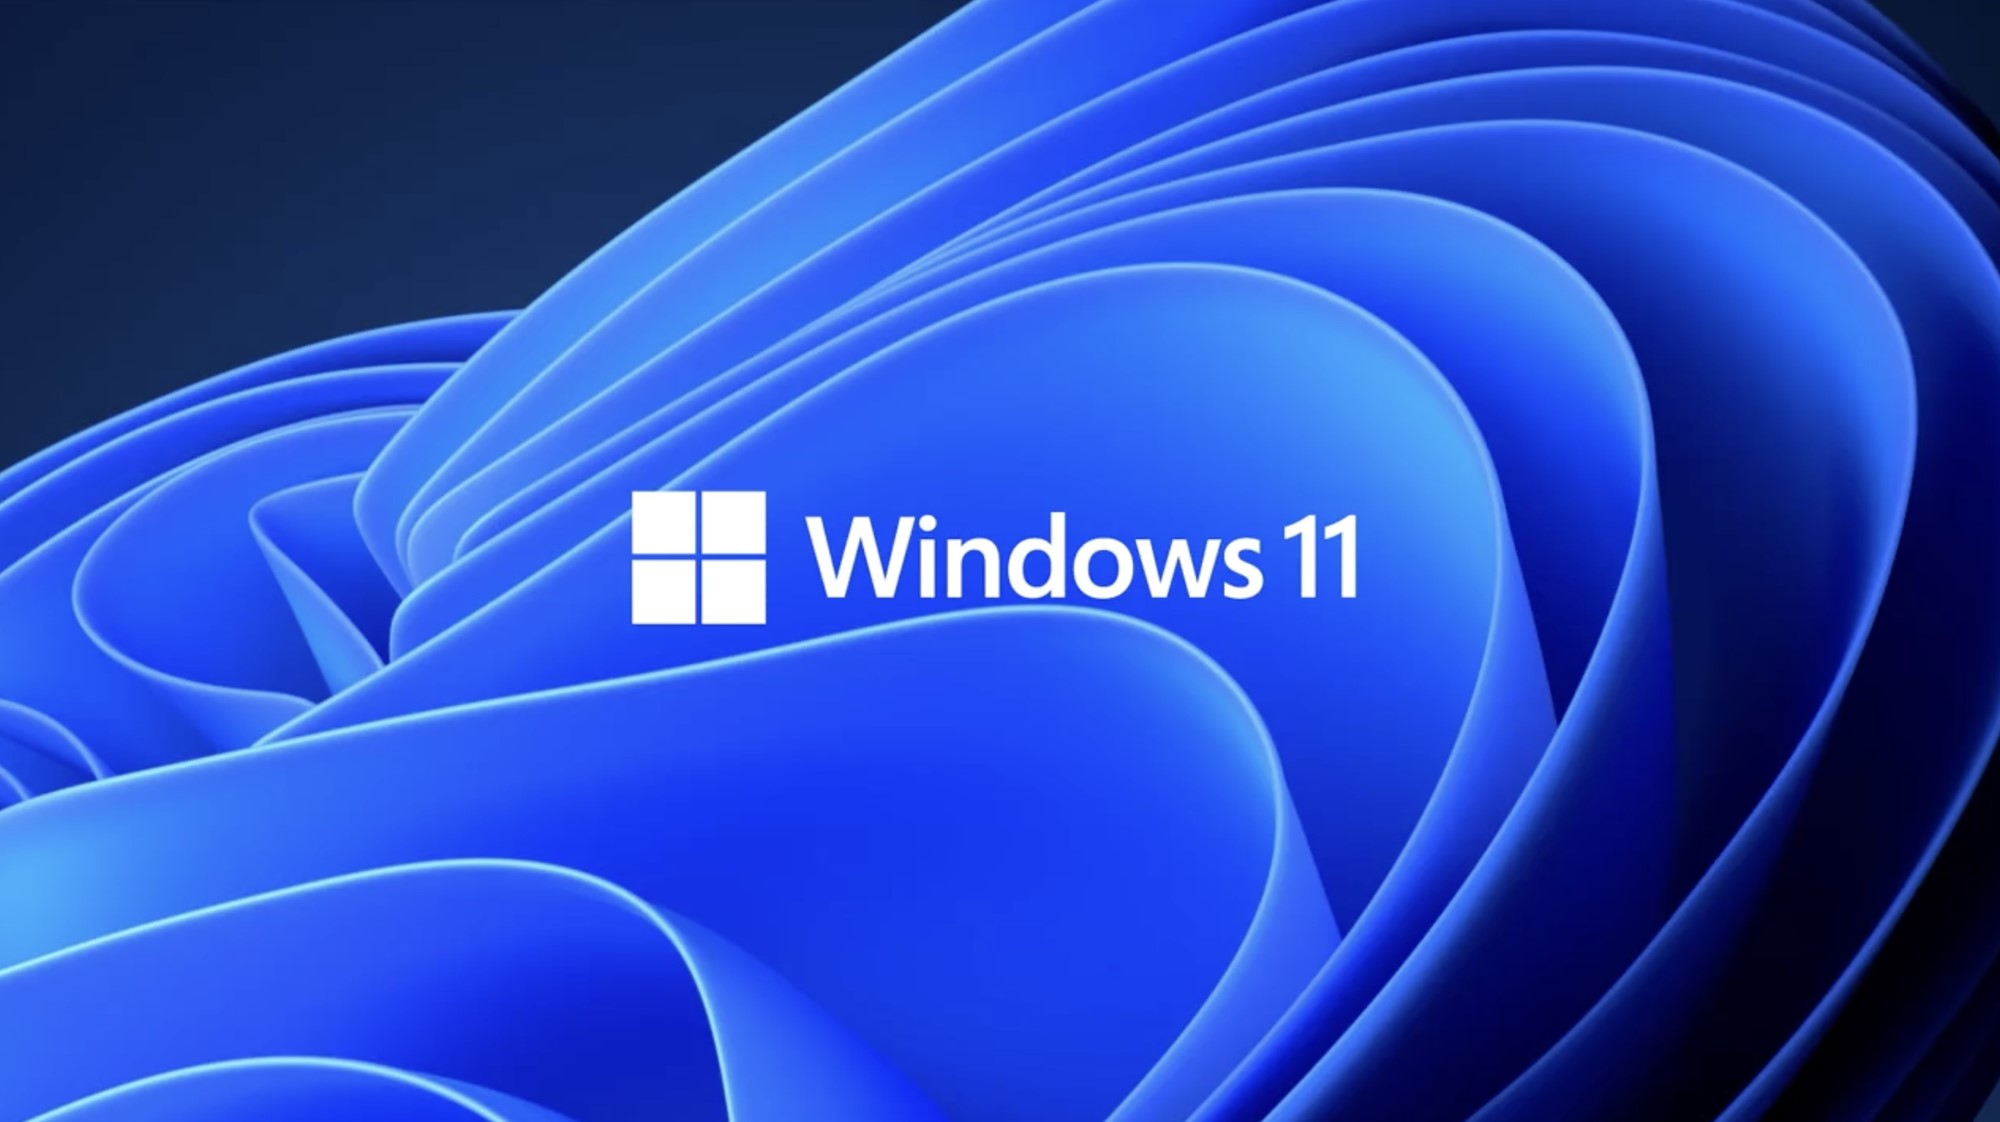 windows 11 insider preview download